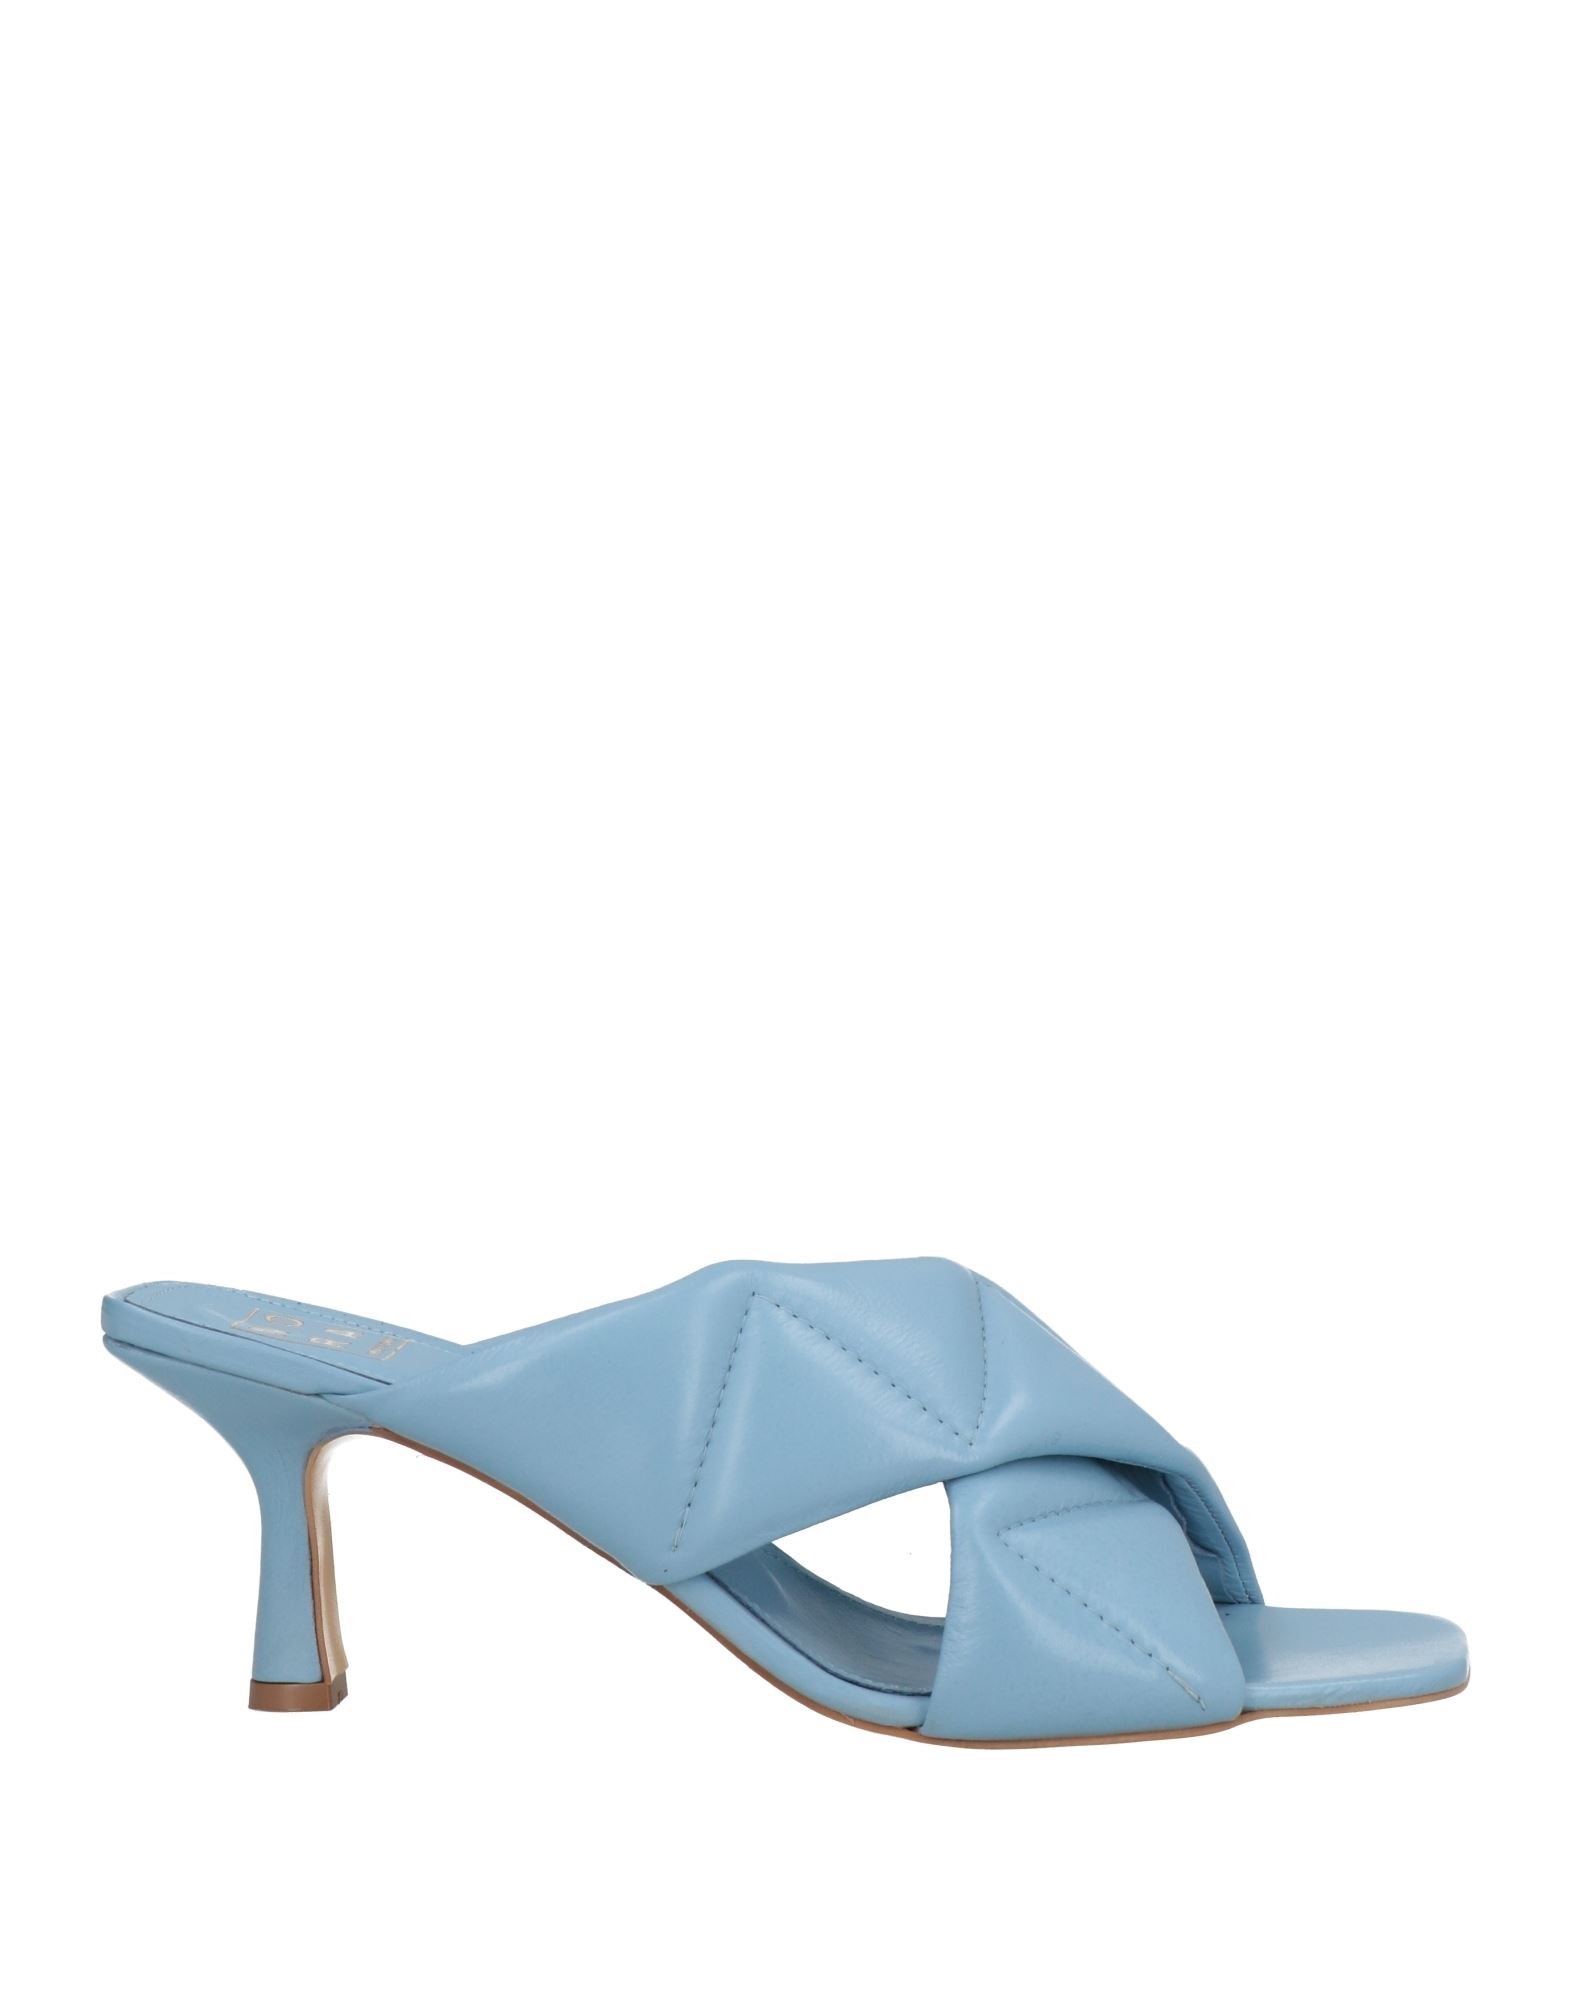 Nora New York Sandals In Blue